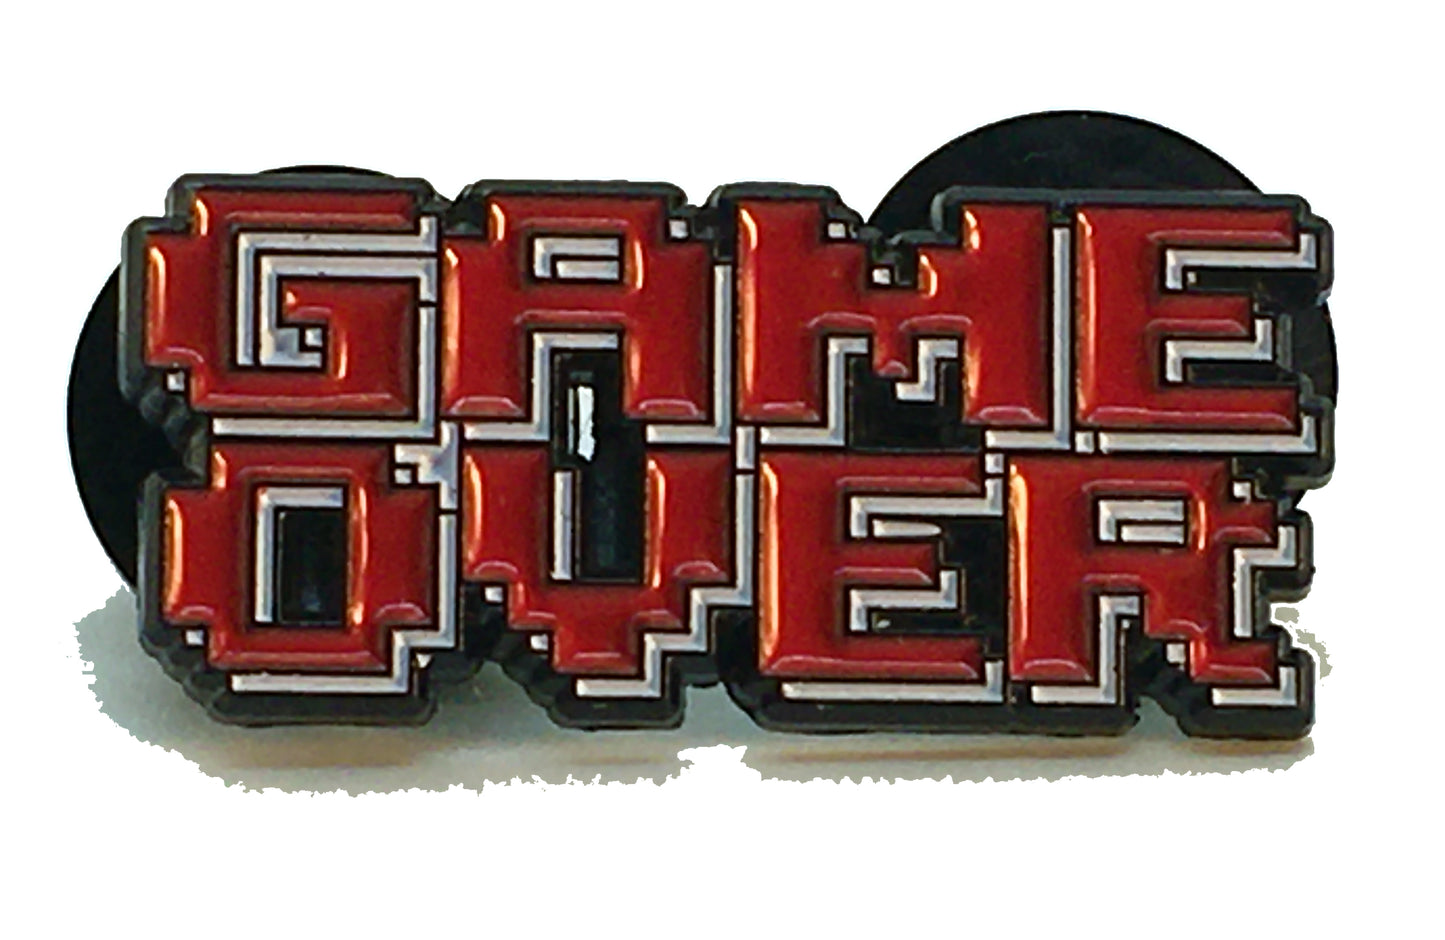 Game Over Pixels Pin